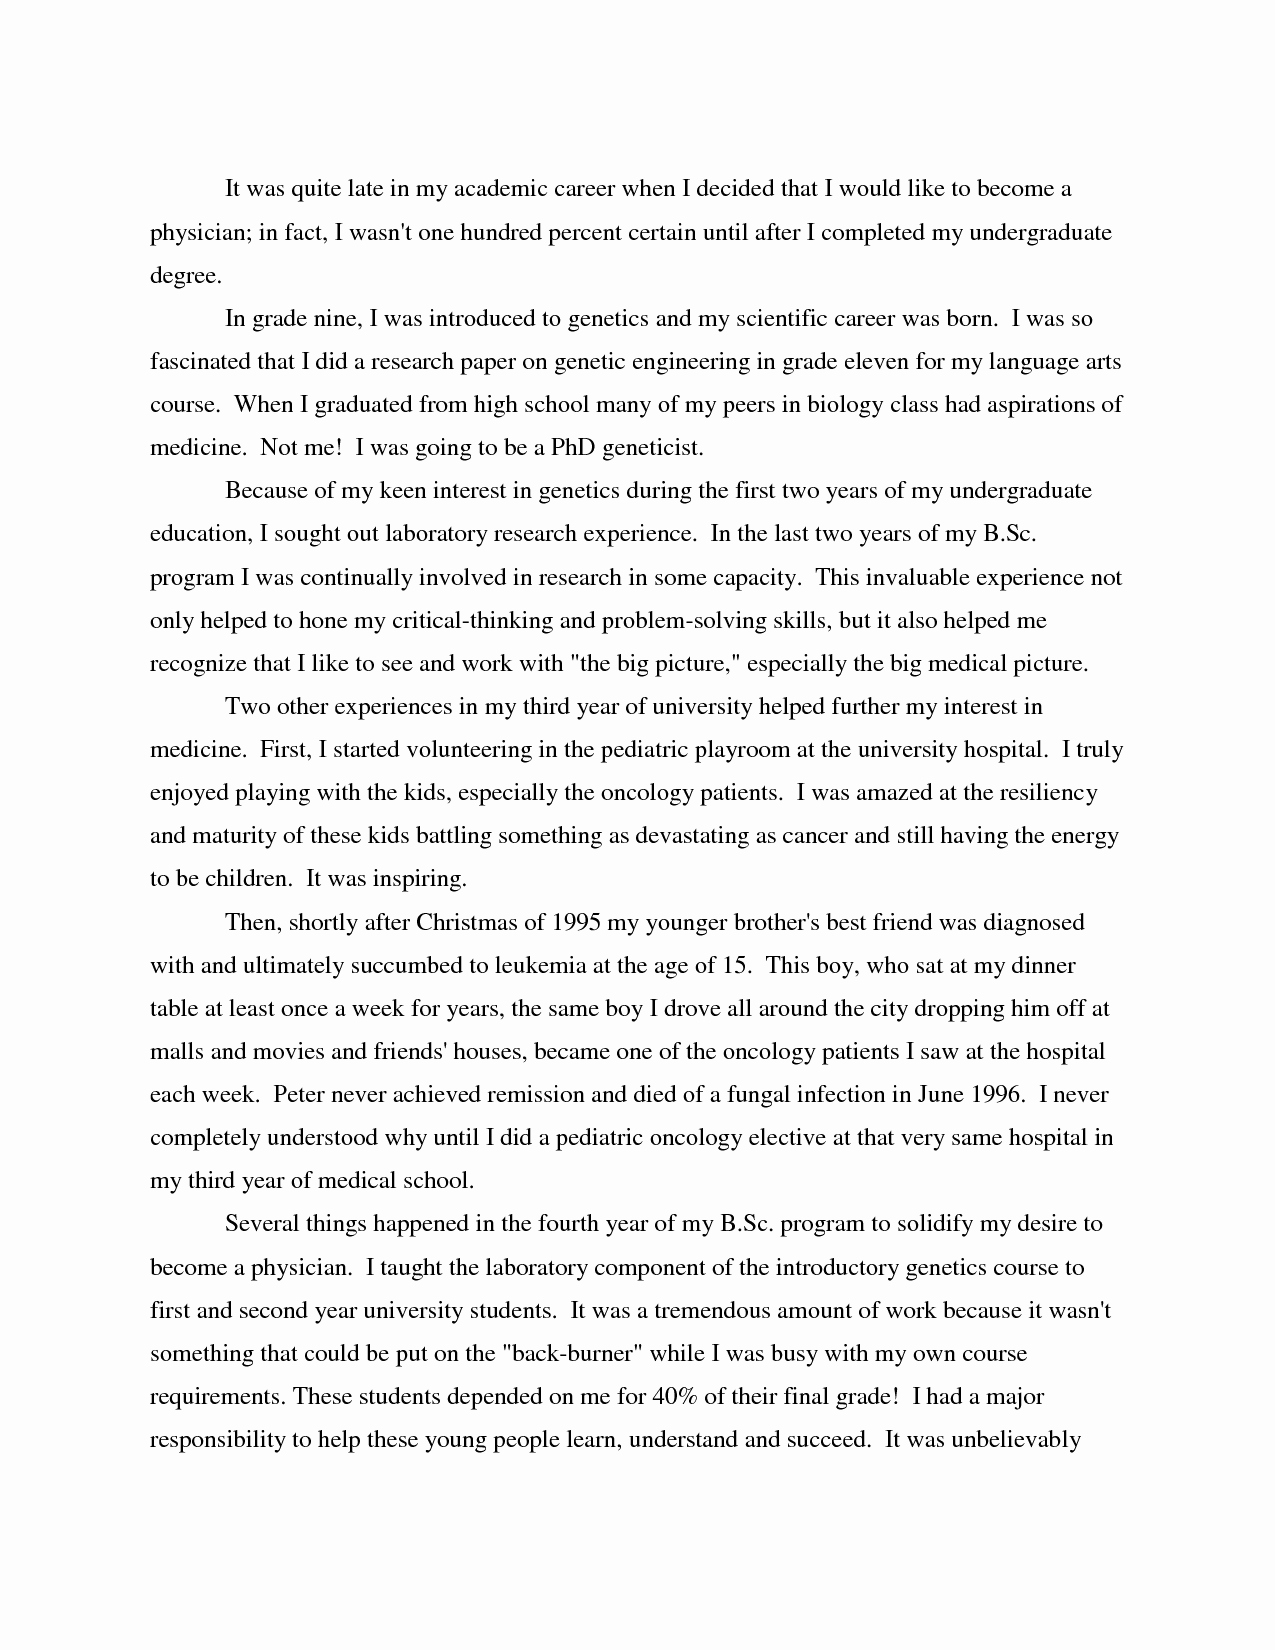 Personal Statement Letter Examples Awesome A Guide to Problem and solution Essays Personal Statement